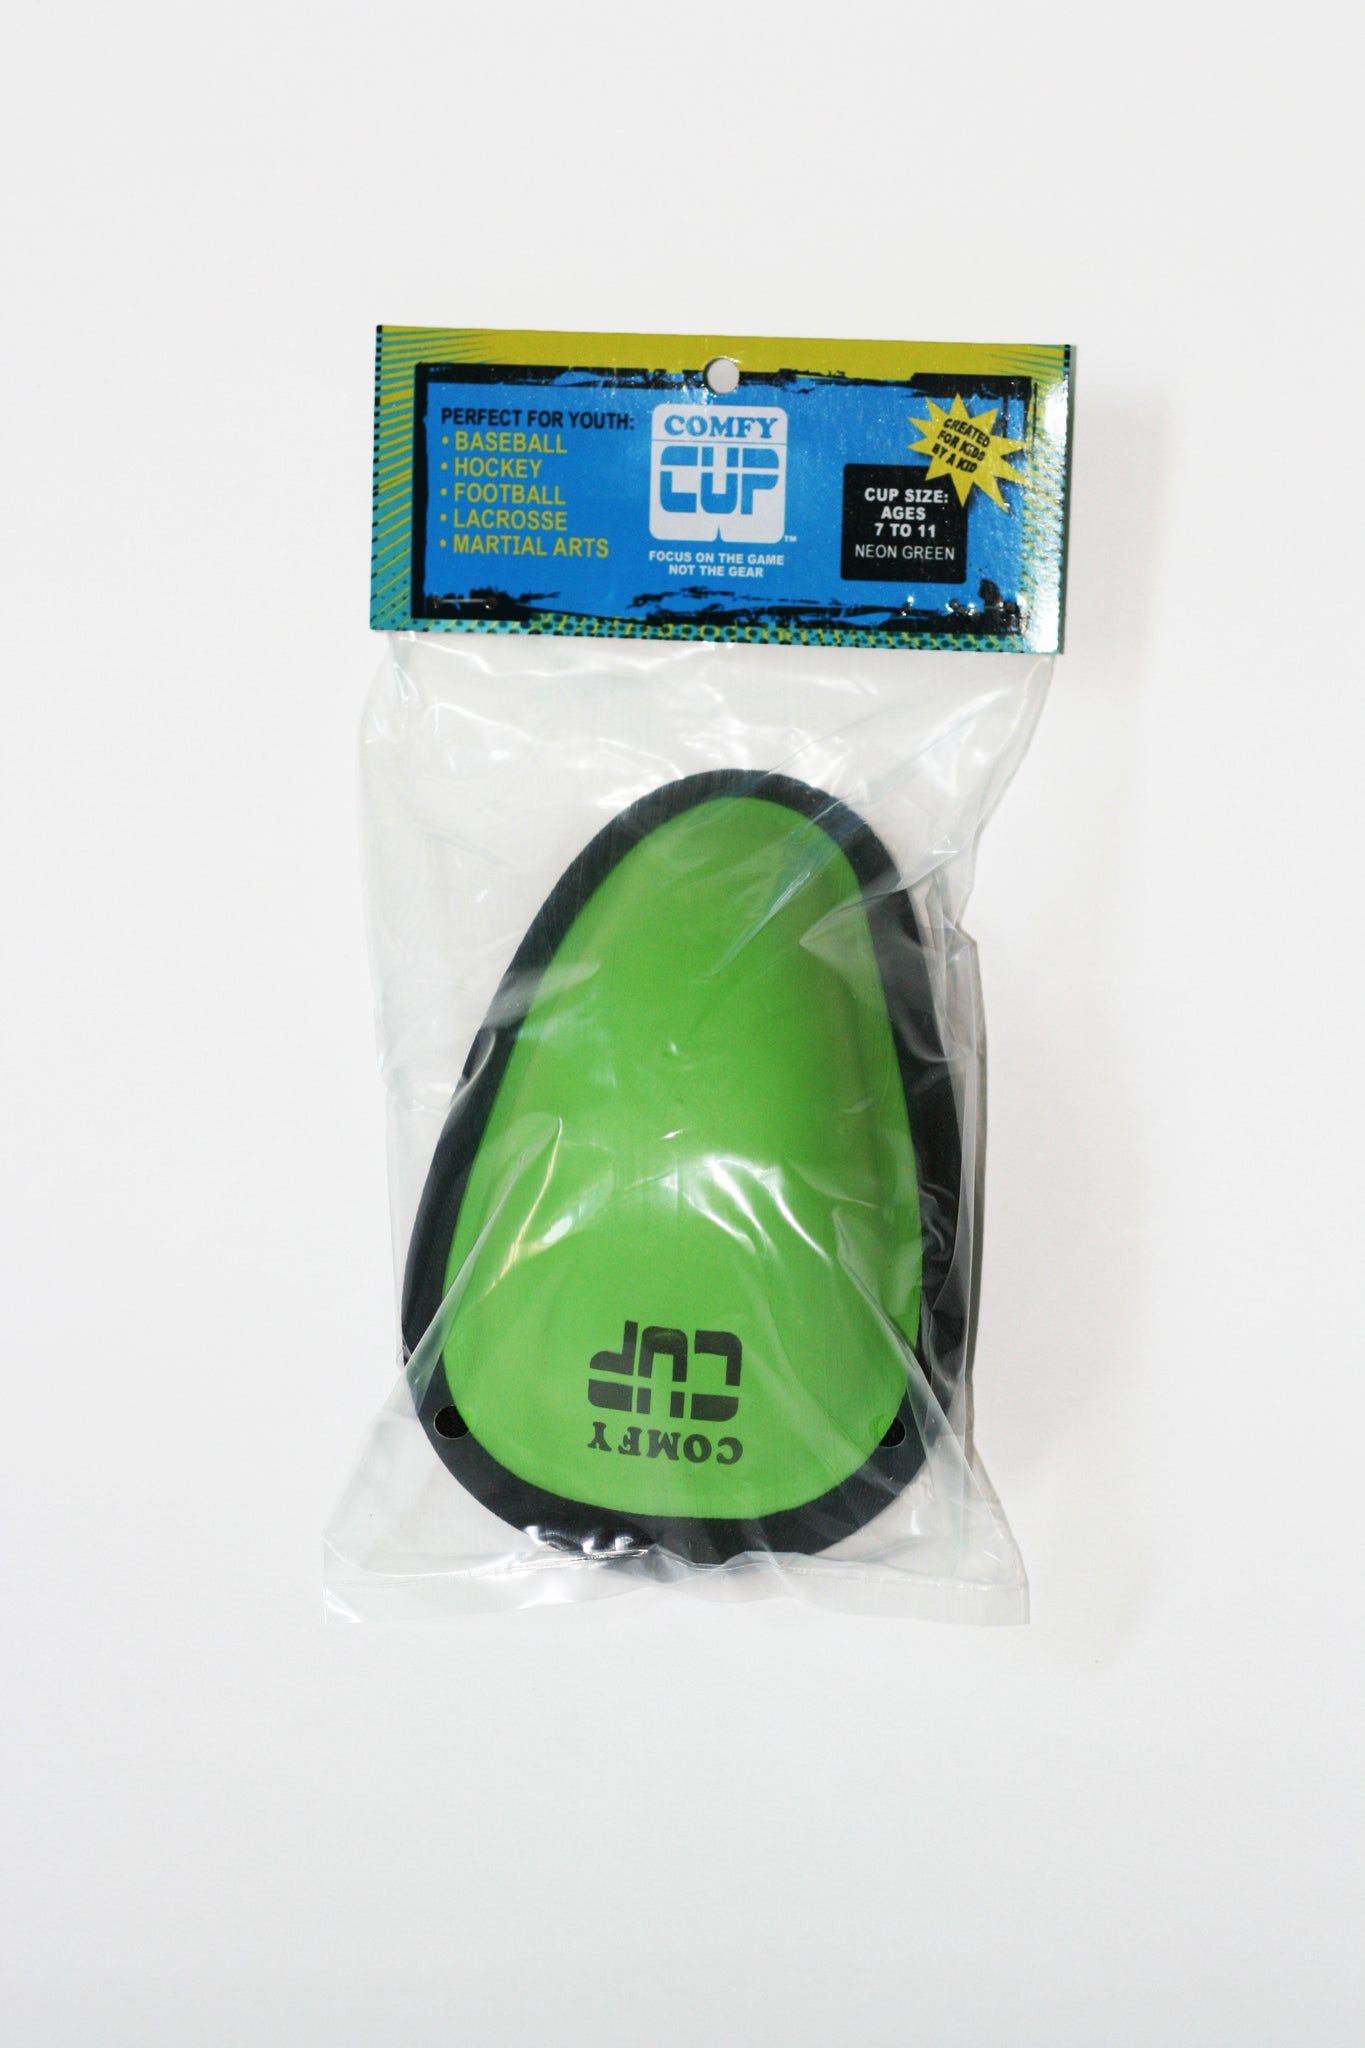 Comfy Cup  Boys Youth Sized Soft Protective Cup Ages 7-11 (Neon